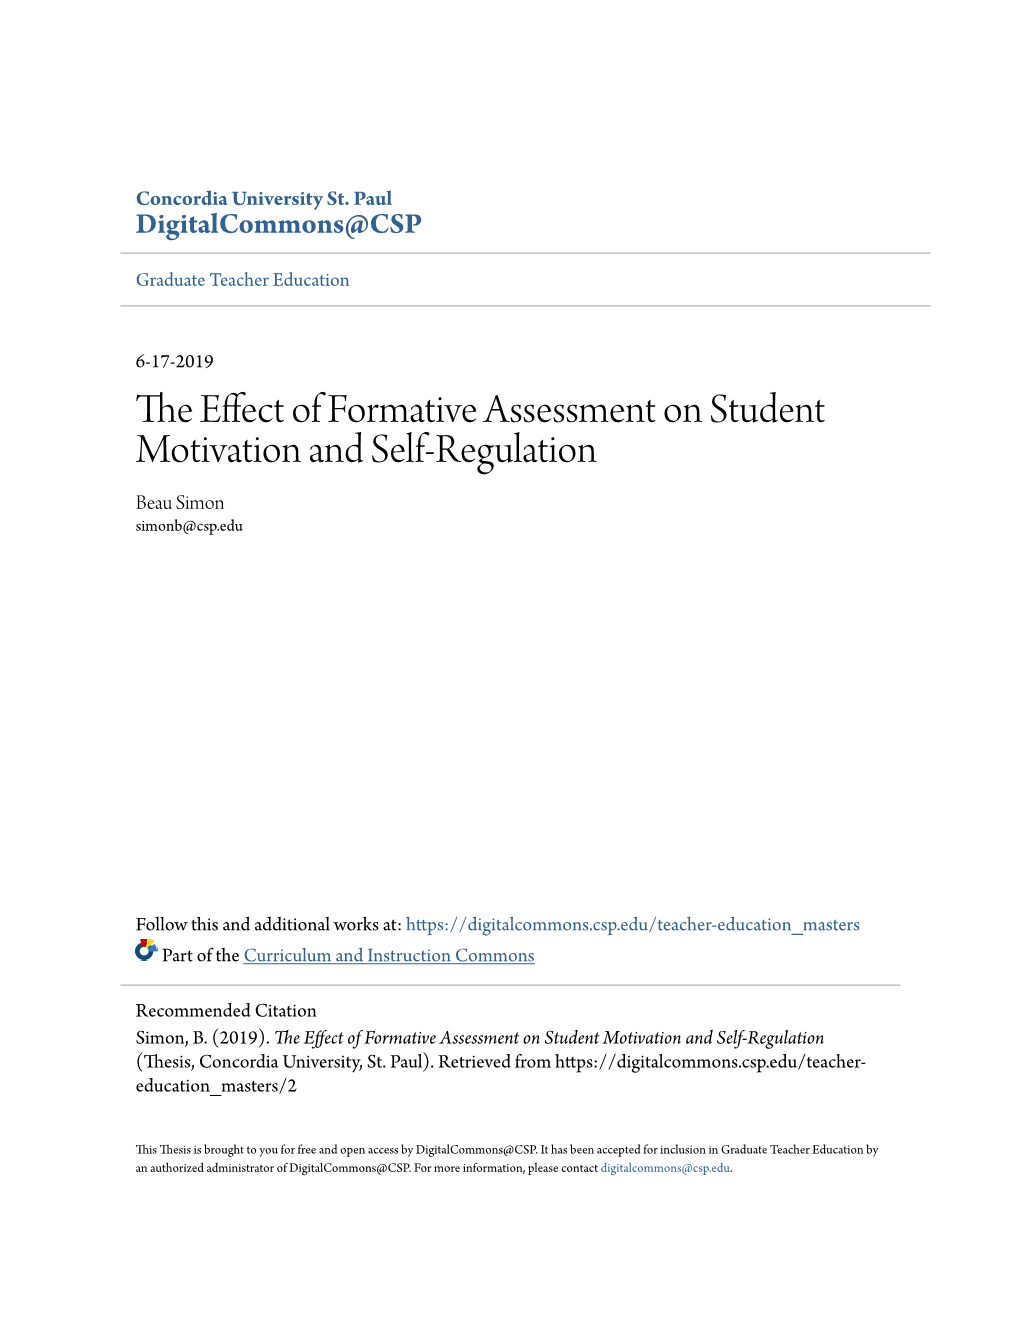 The Effect of Formative Assessment on Student Motivation and Self-Regulation (Thesis, Concordia University, St